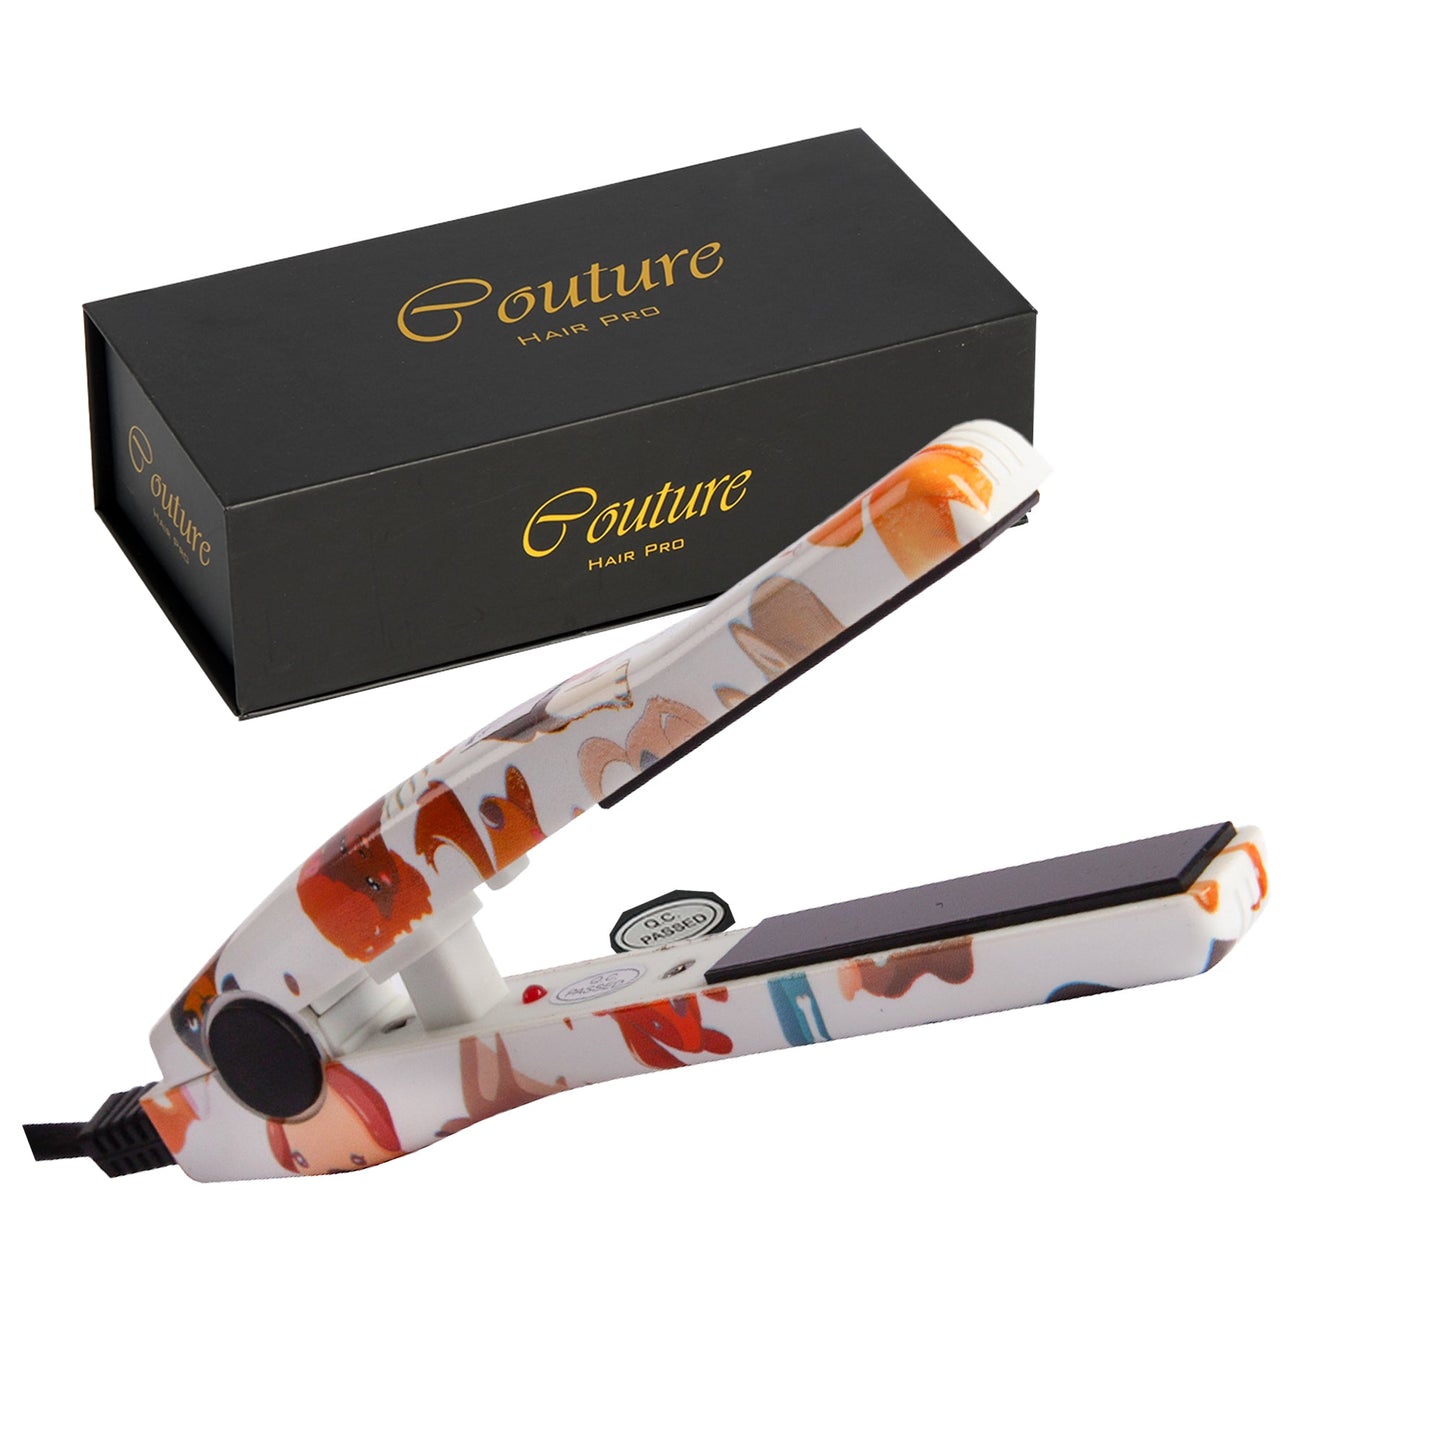 Couture Hair Pro Petite Mini Hair Straightener - #1 Selling Hair Tools Brand in the Middle East - Couture Hair Pro